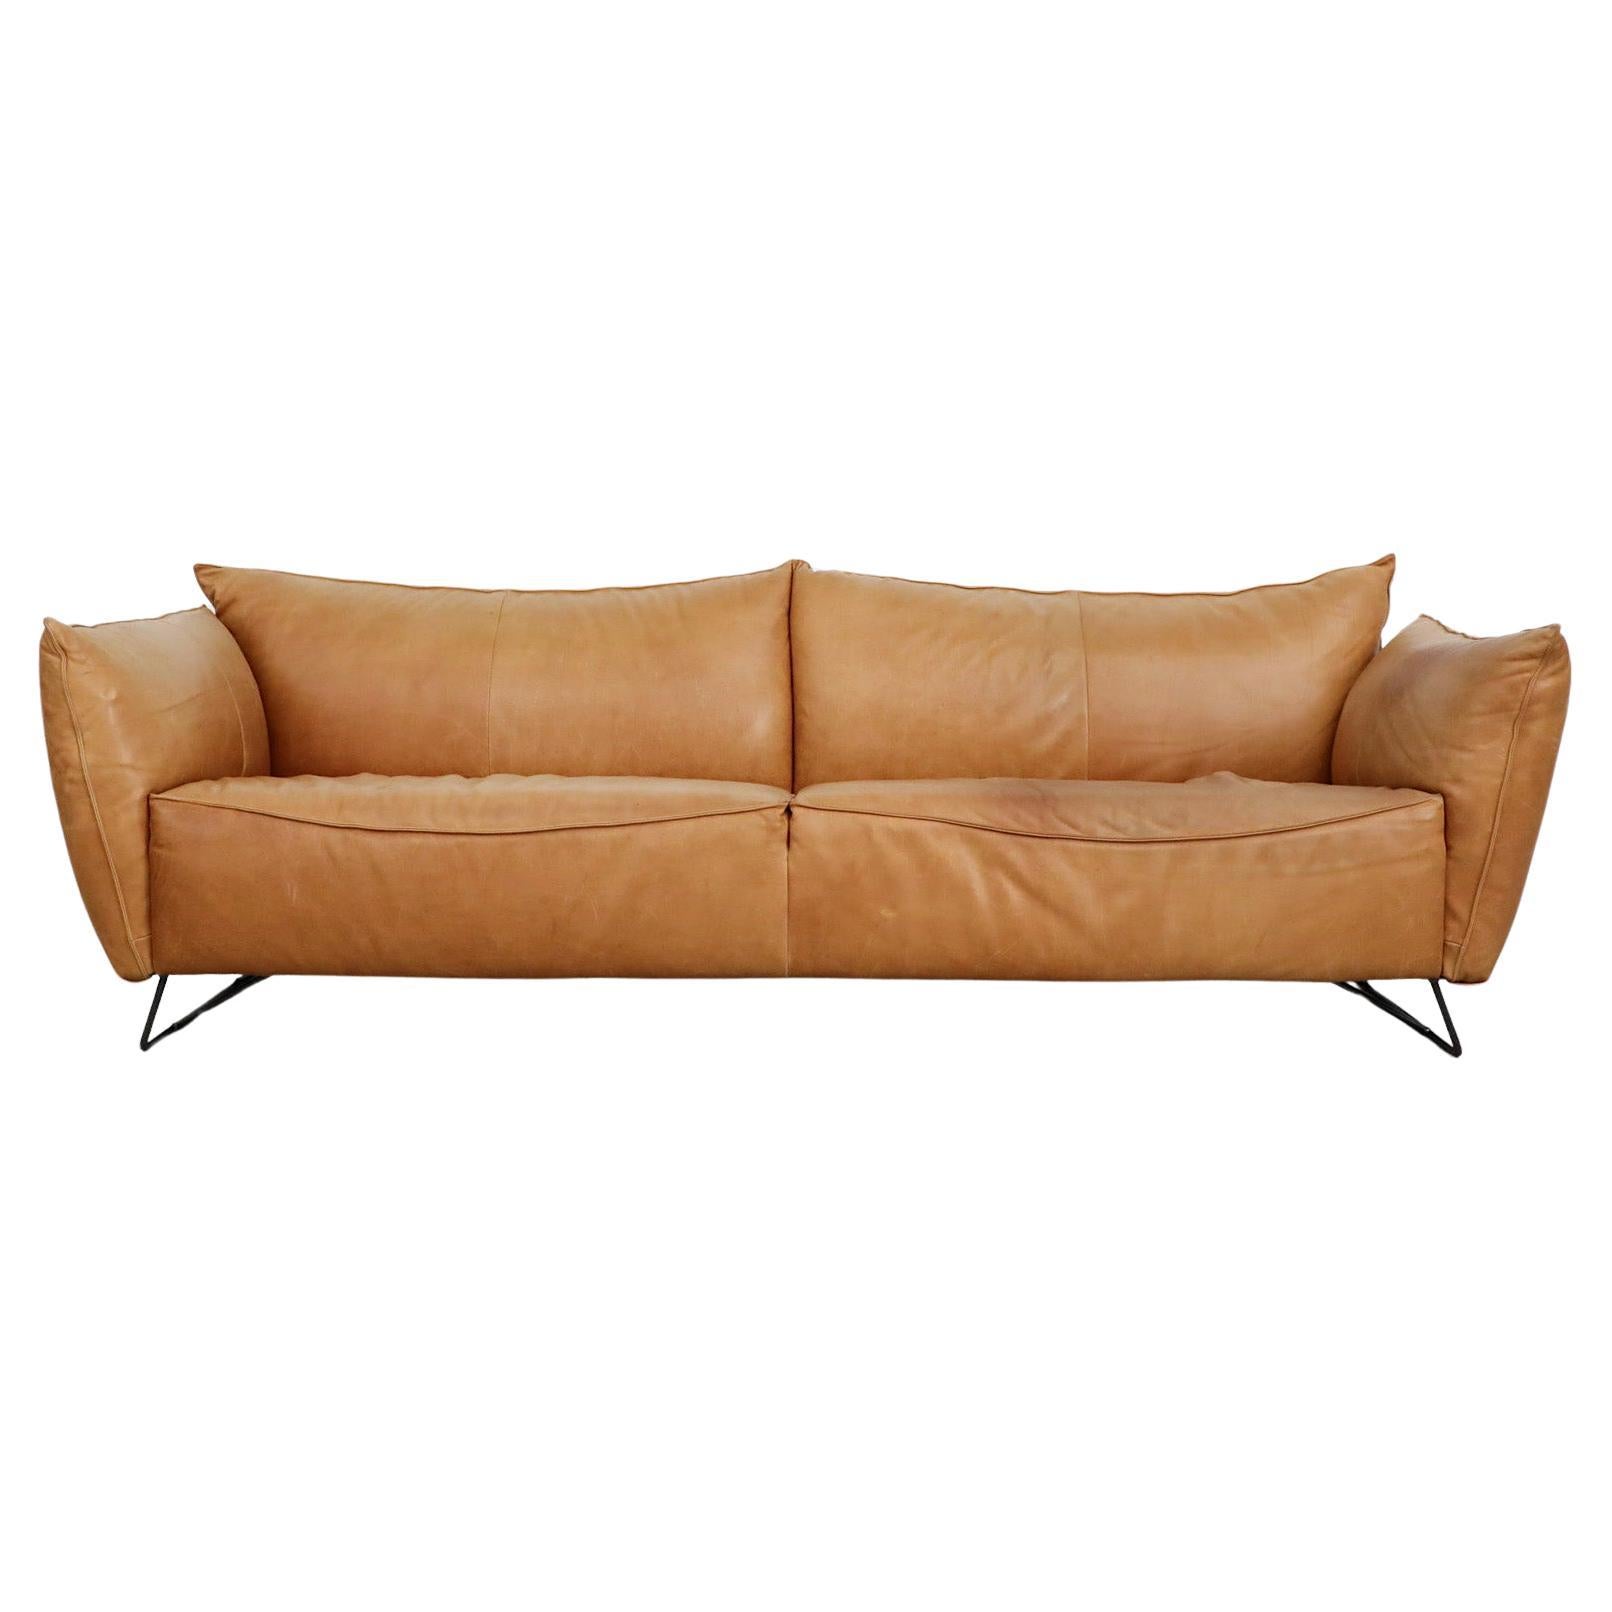 Gerard Van Den Berg style butterscotch 3 seater sofa for Jess For Sale